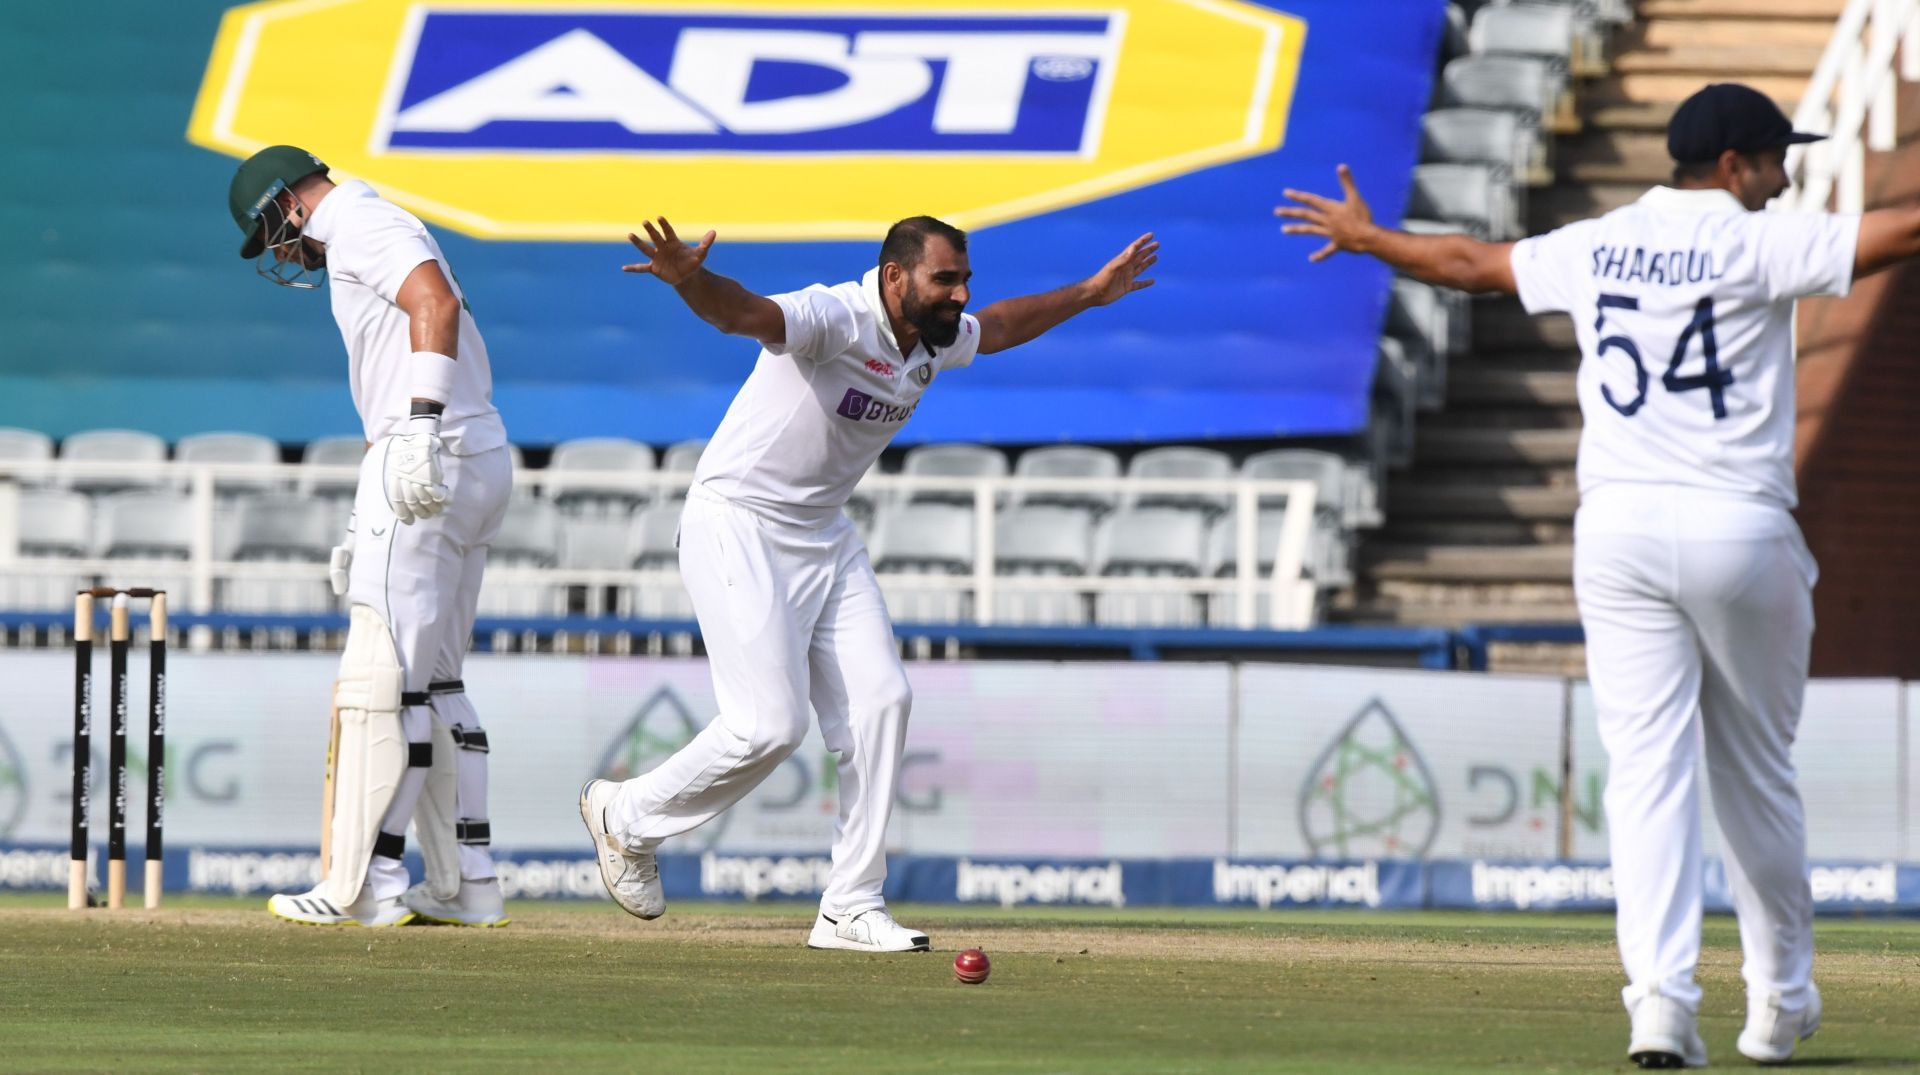 Mohammed Shami is currently playing in the ICC World Test Championship series between India and South Africa